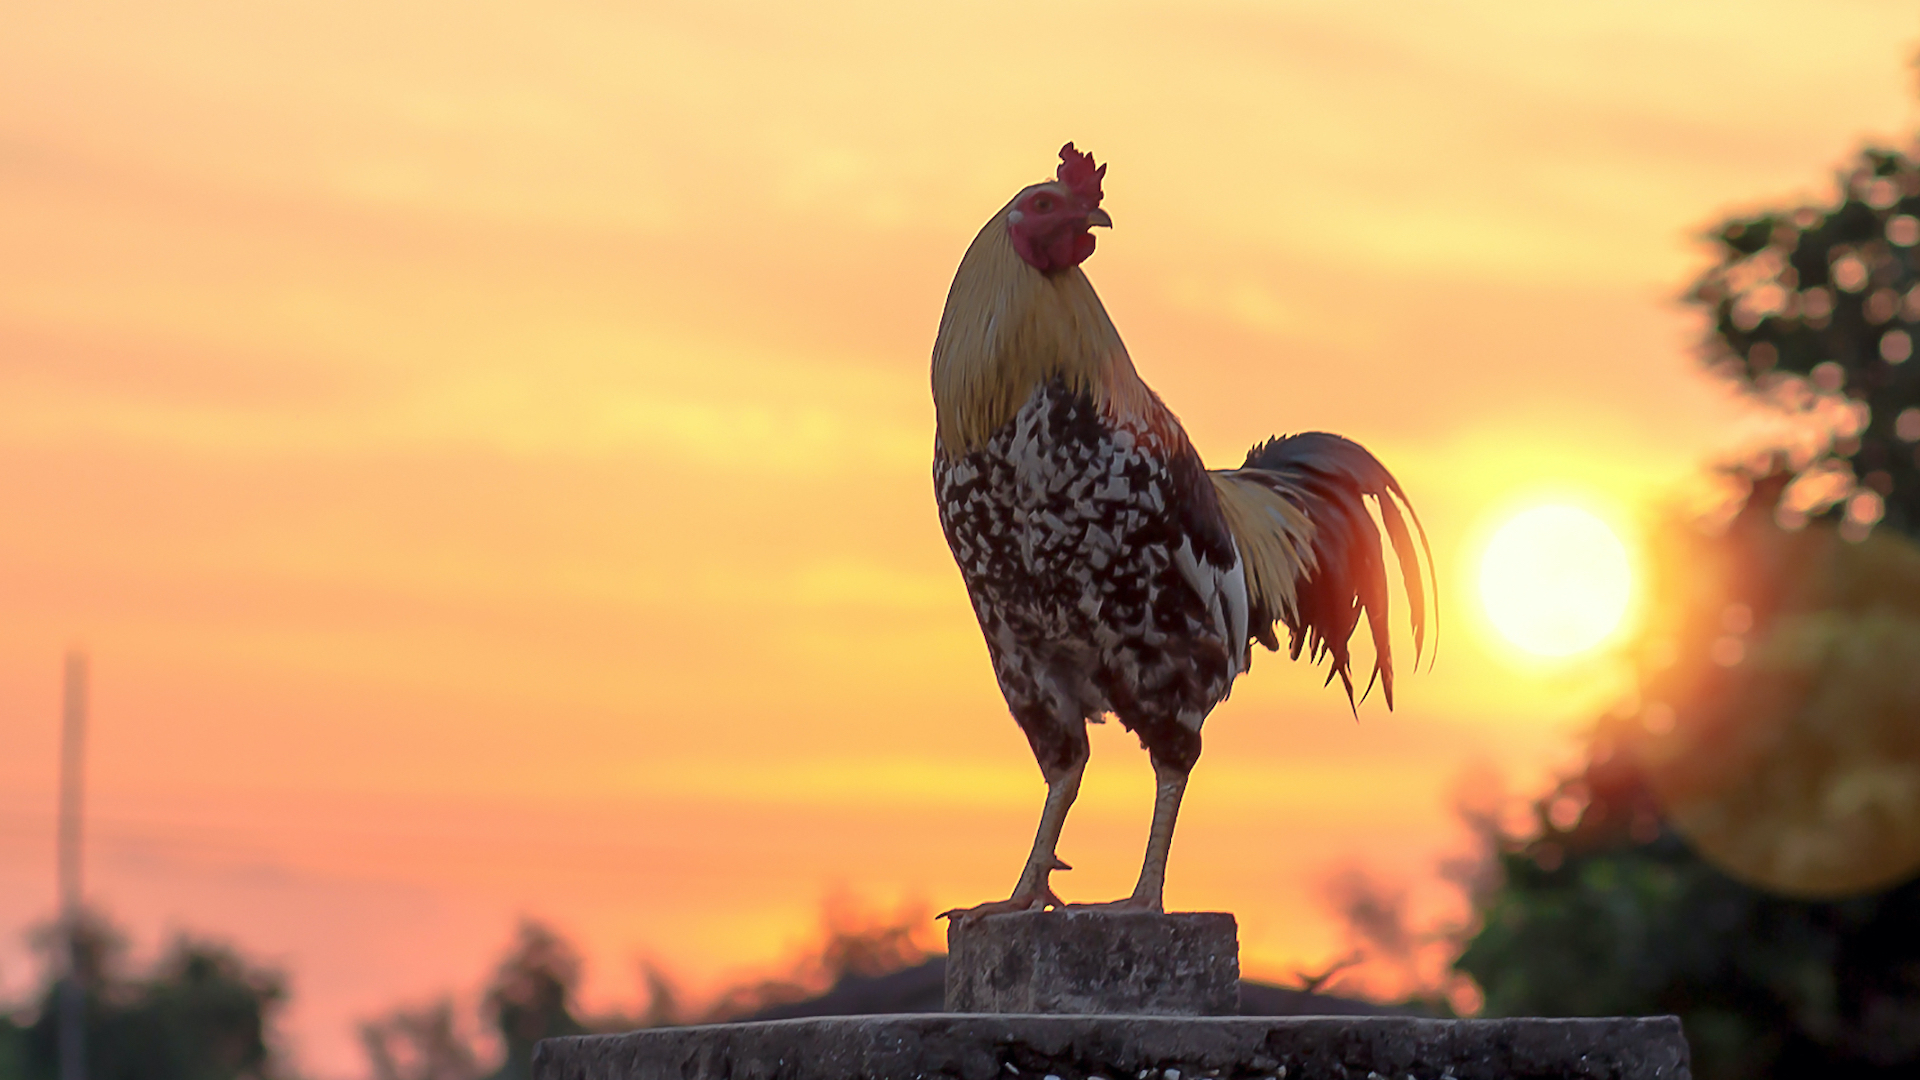 A rooster at sunrise